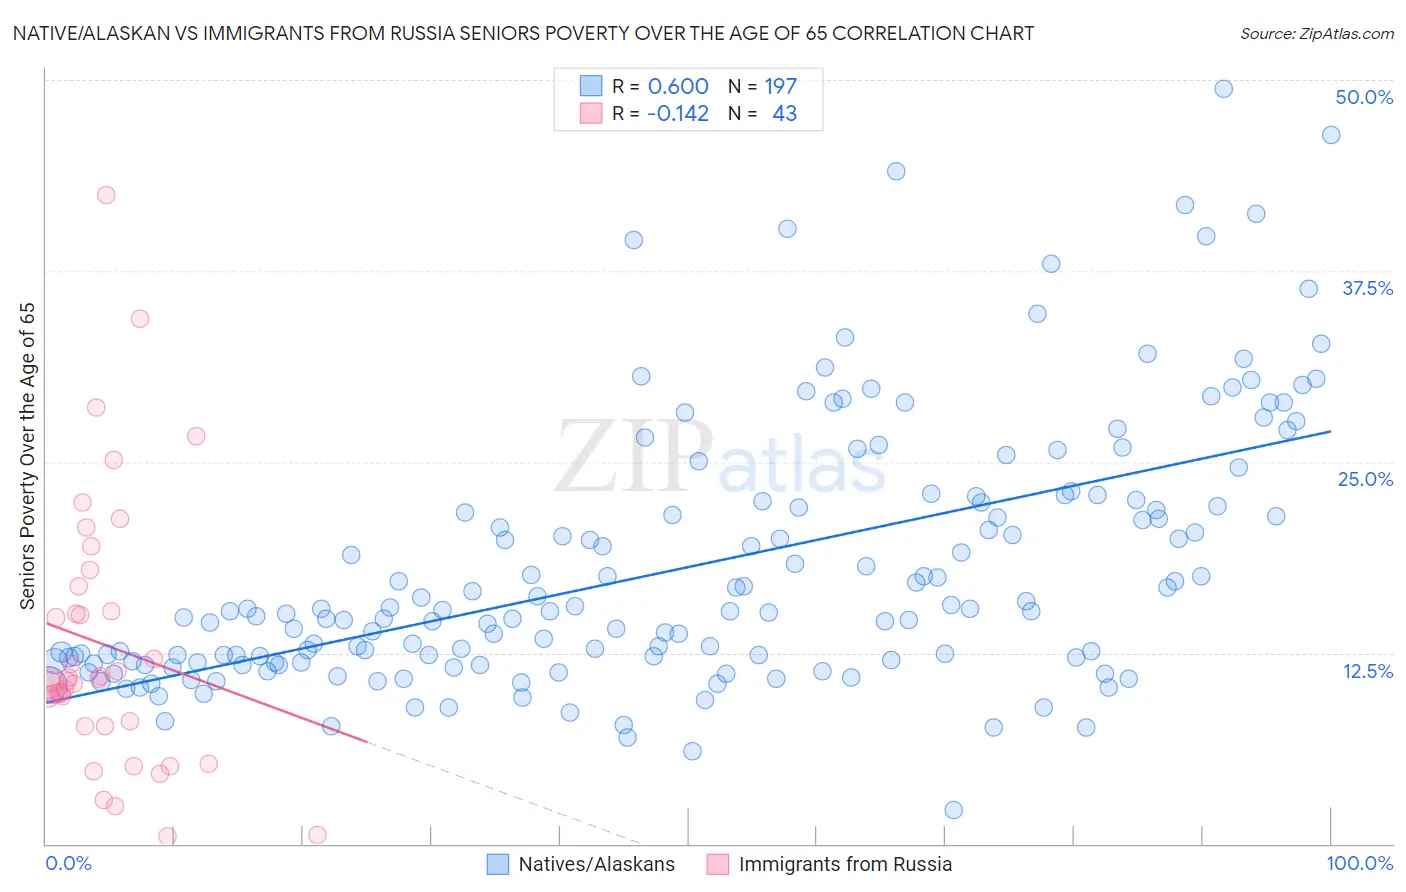 Native/Alaskan vs Immigrants from Russia Seniors Poverty Over the Age of 65